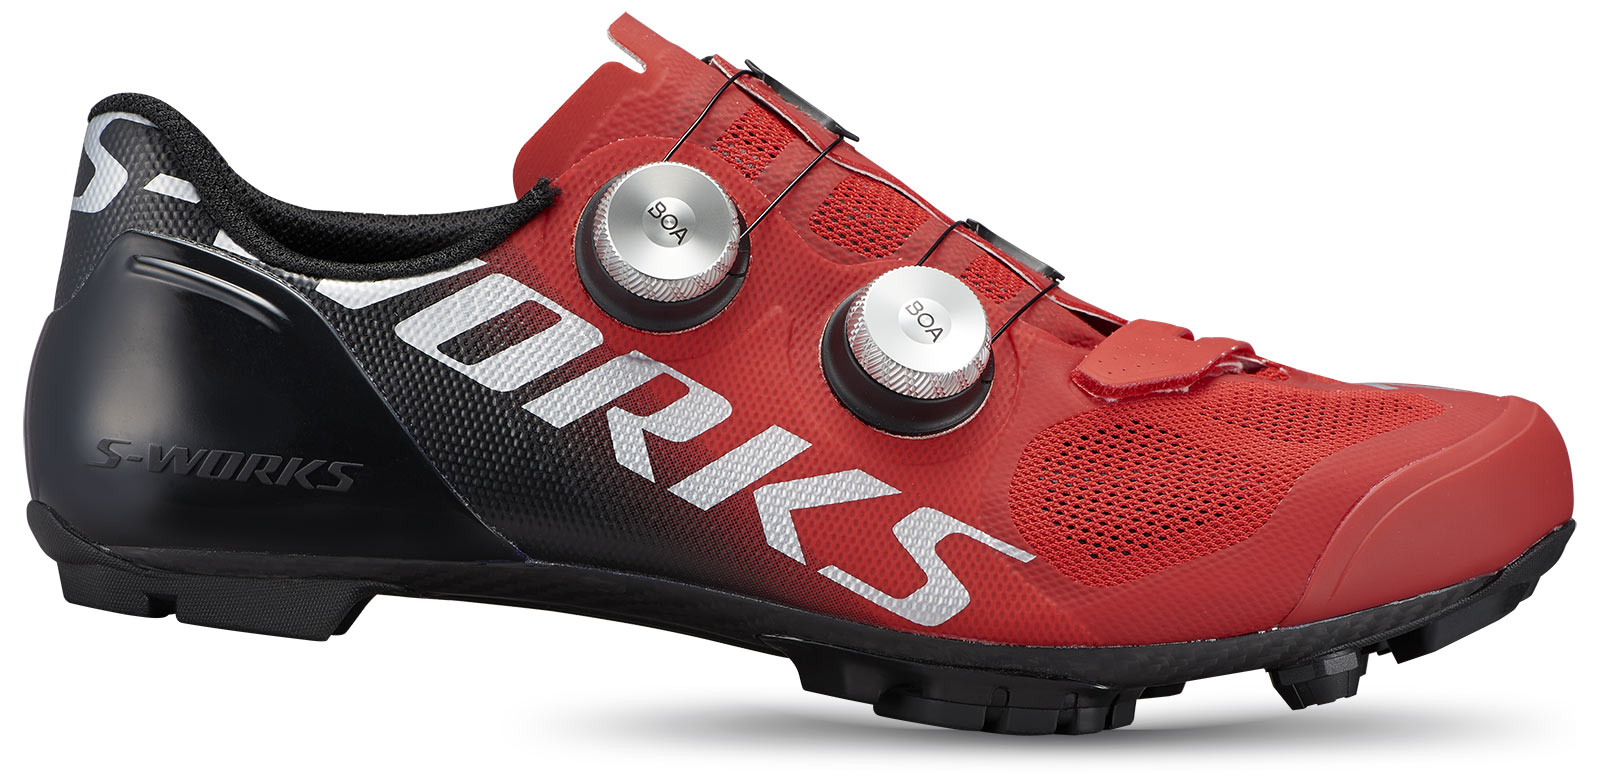 new specialized s-works vent evo gravel bike shoes in red